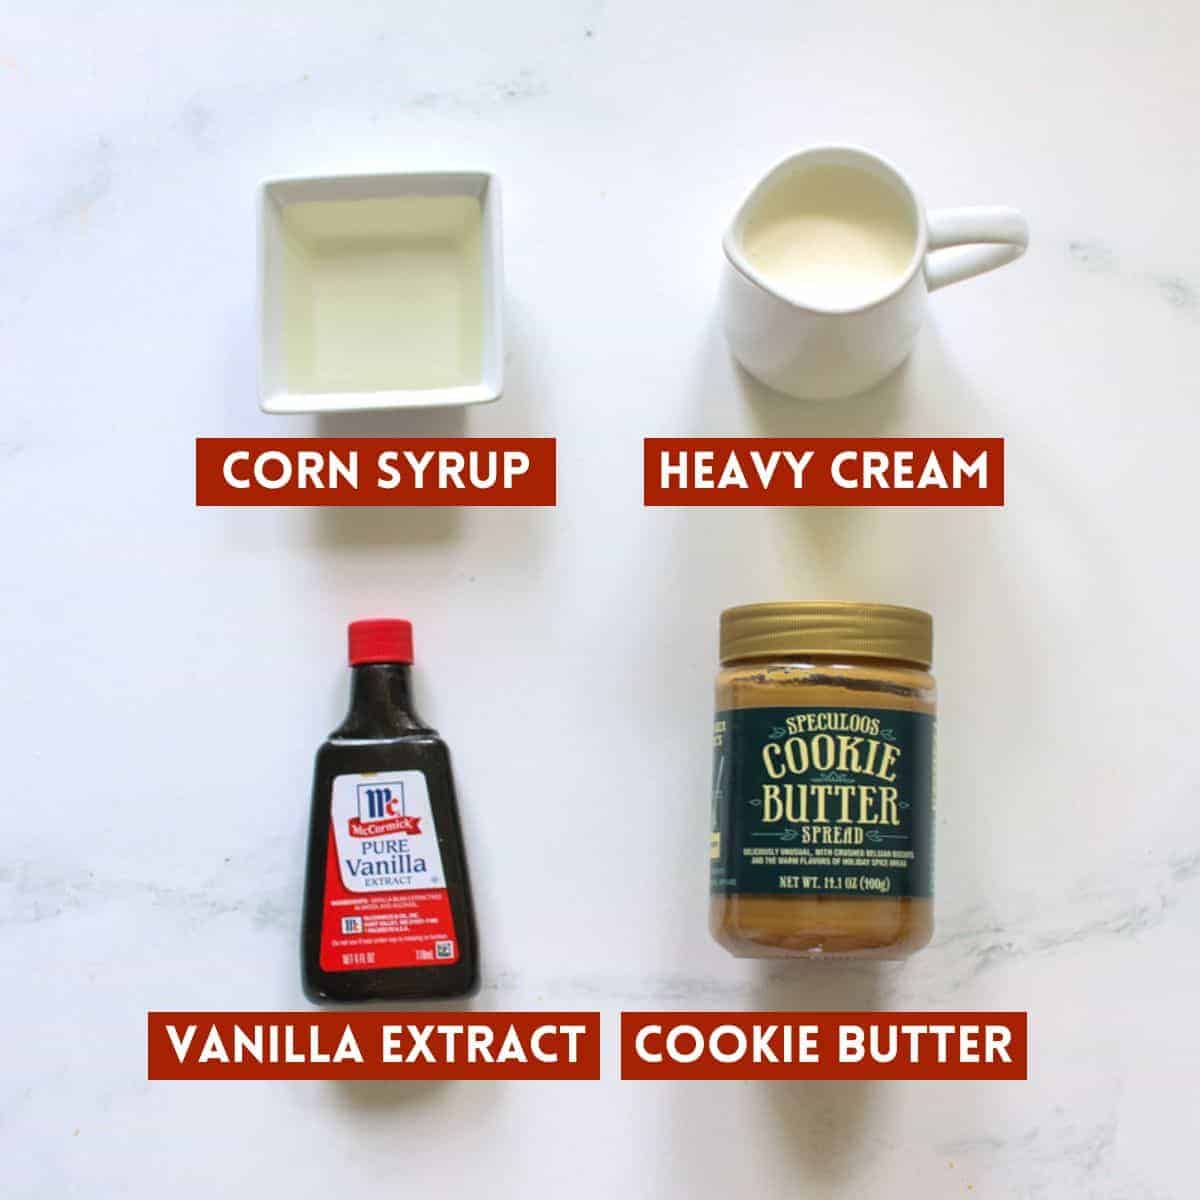 Cookie butter fudge ingredients on a white marble background. Each item is labeled with a dark red rectangle with white text in all caps.